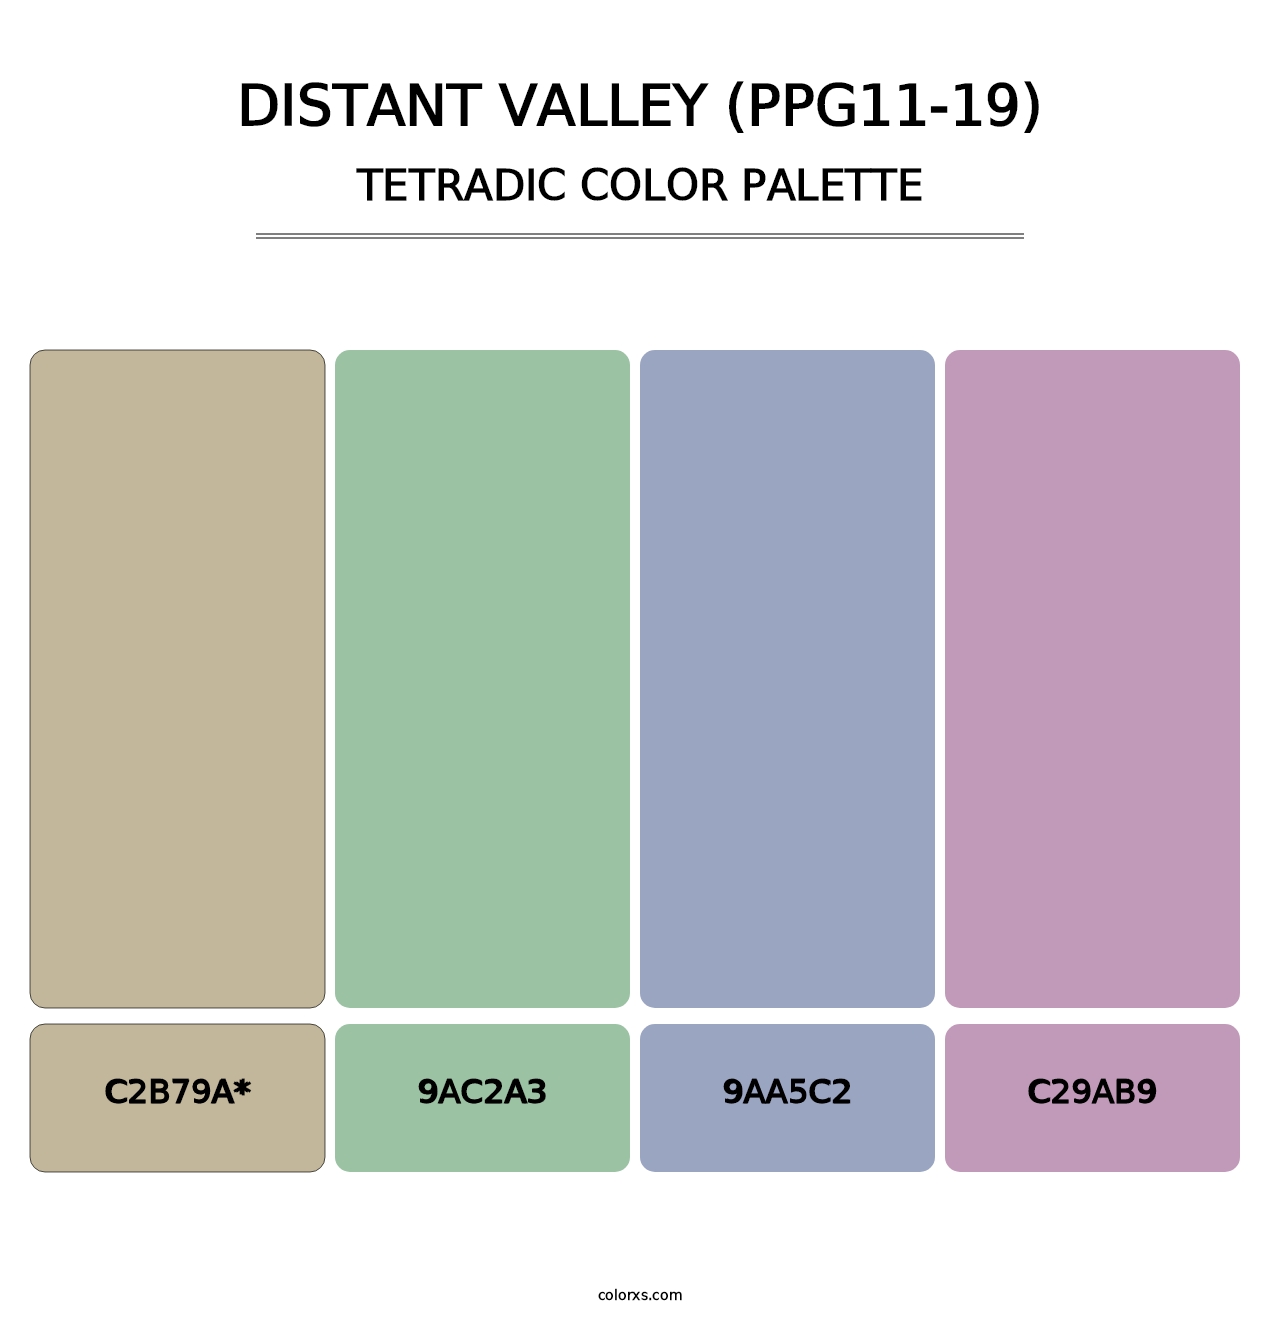 Distant Valley (PPG11-19) - Tetradic Color Palette